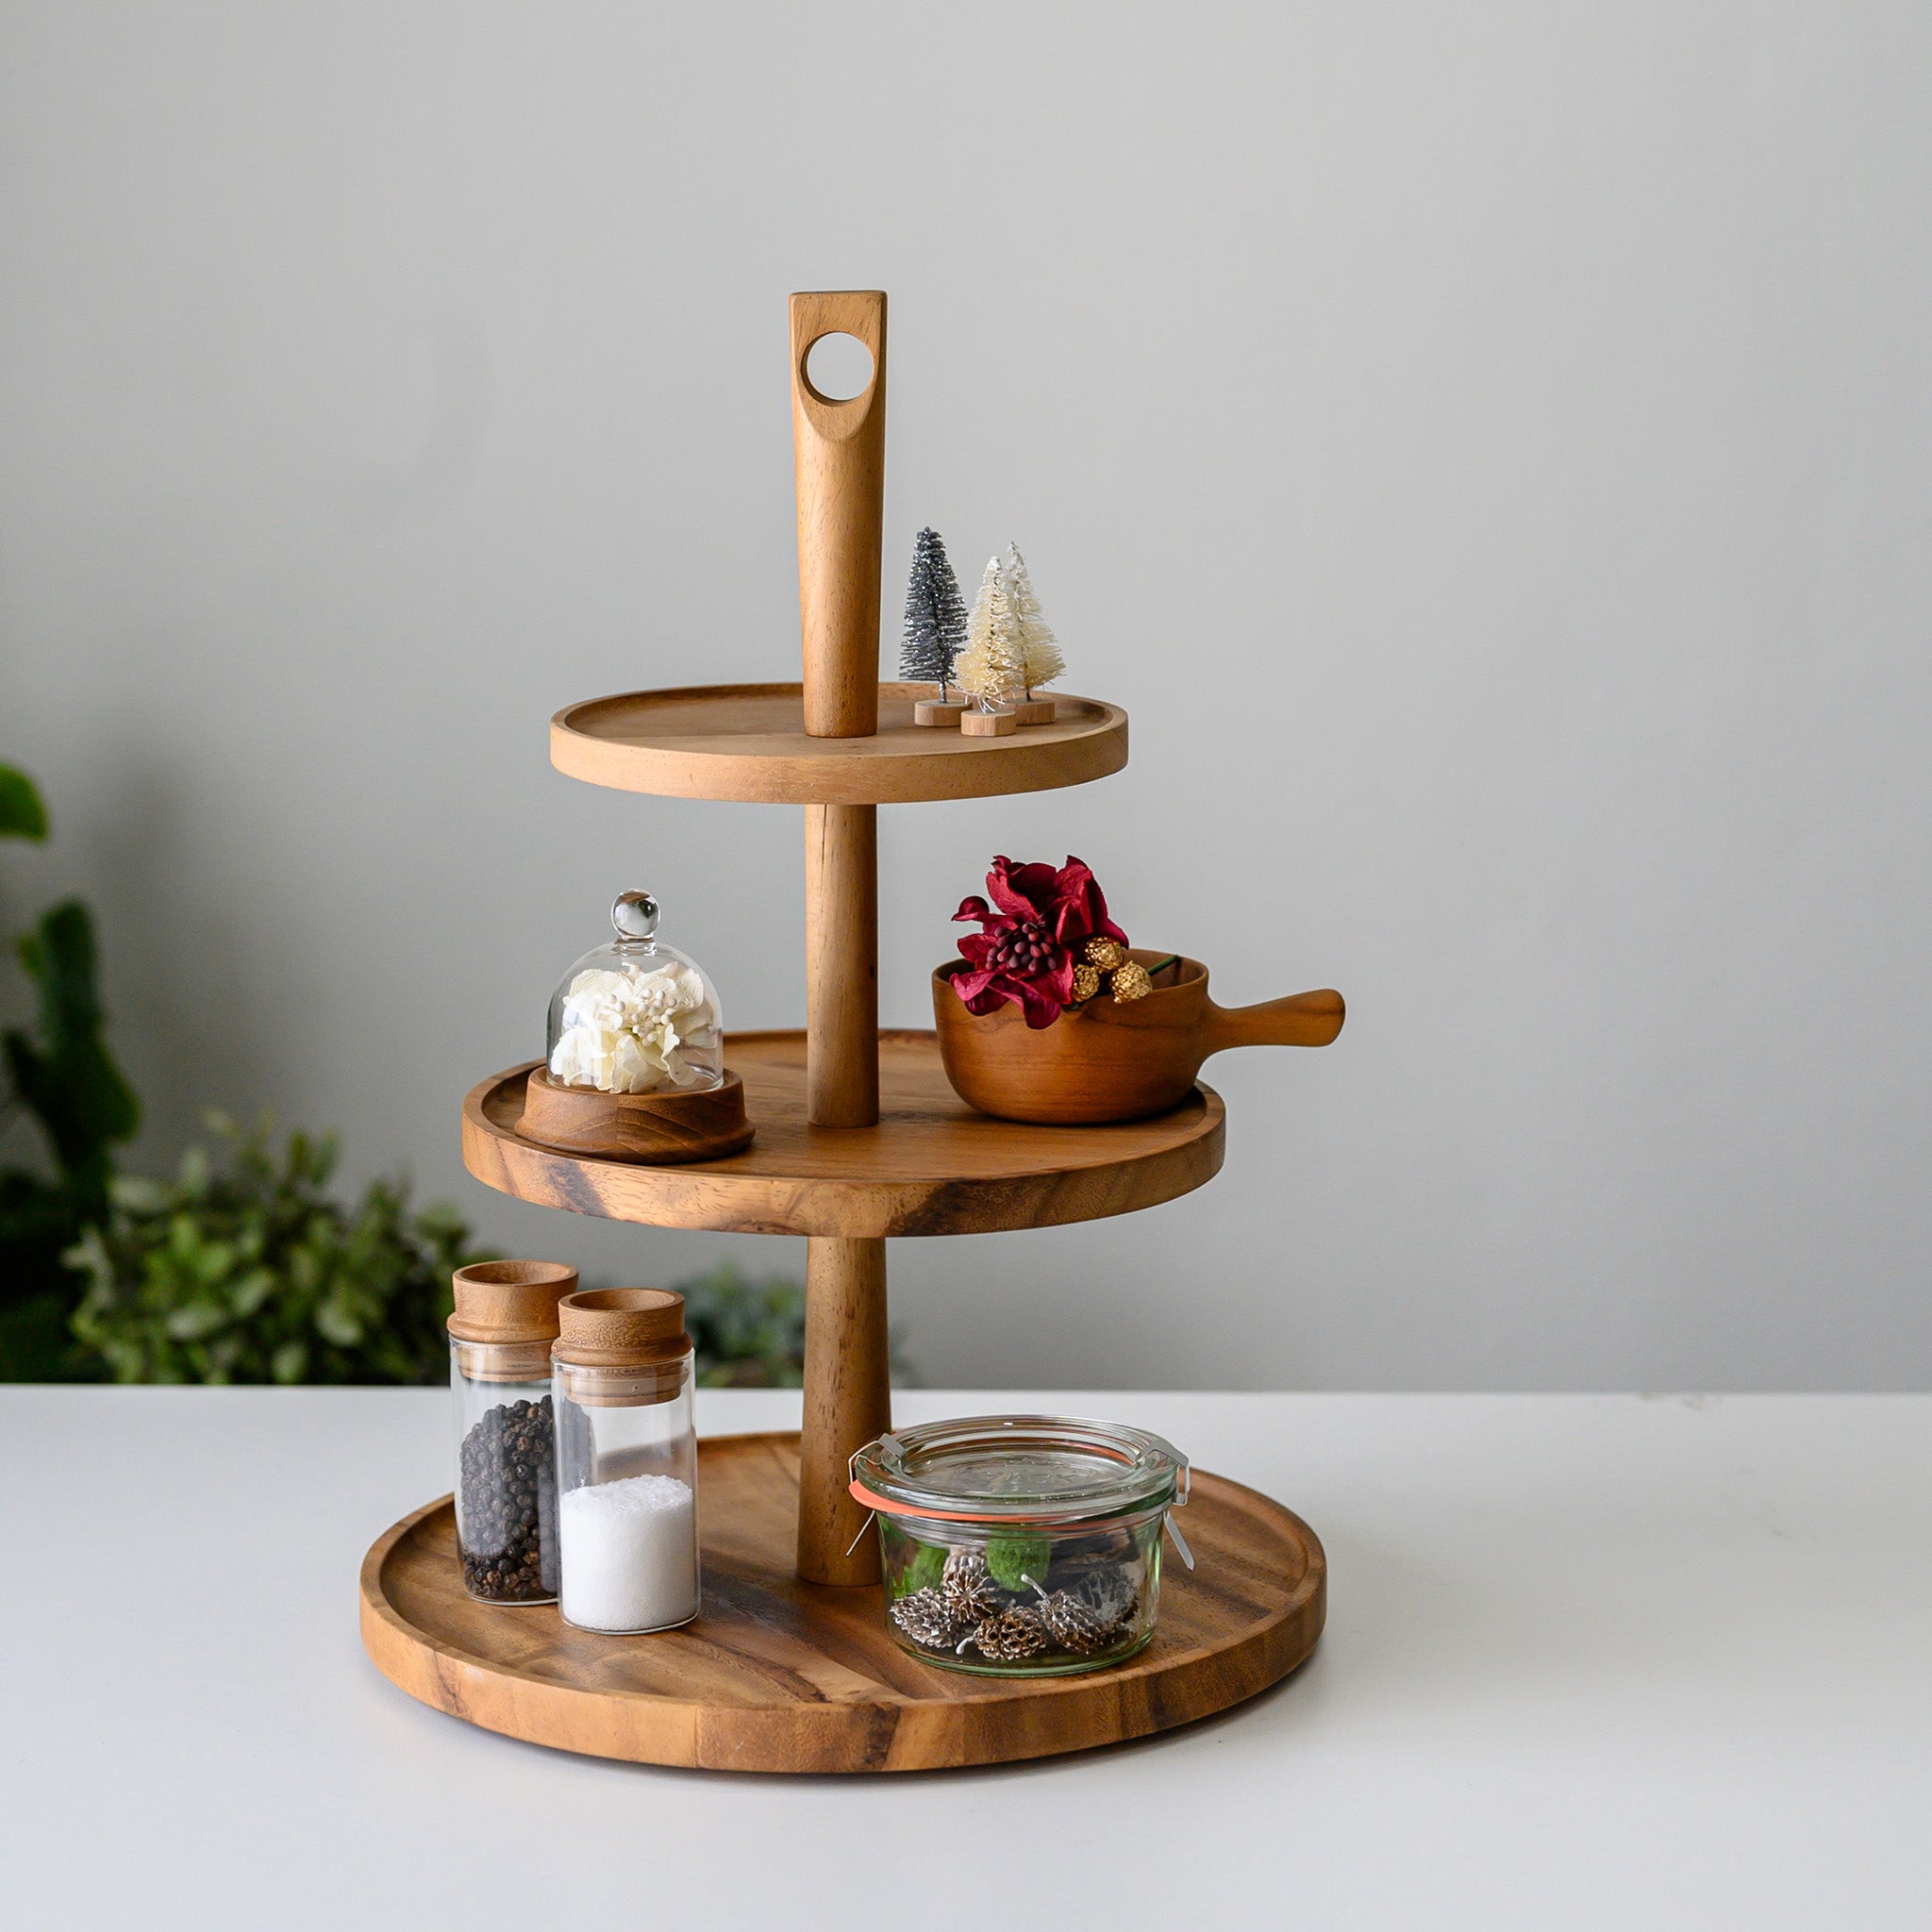 CYNOSURE 3 TIERS CAKE STAND